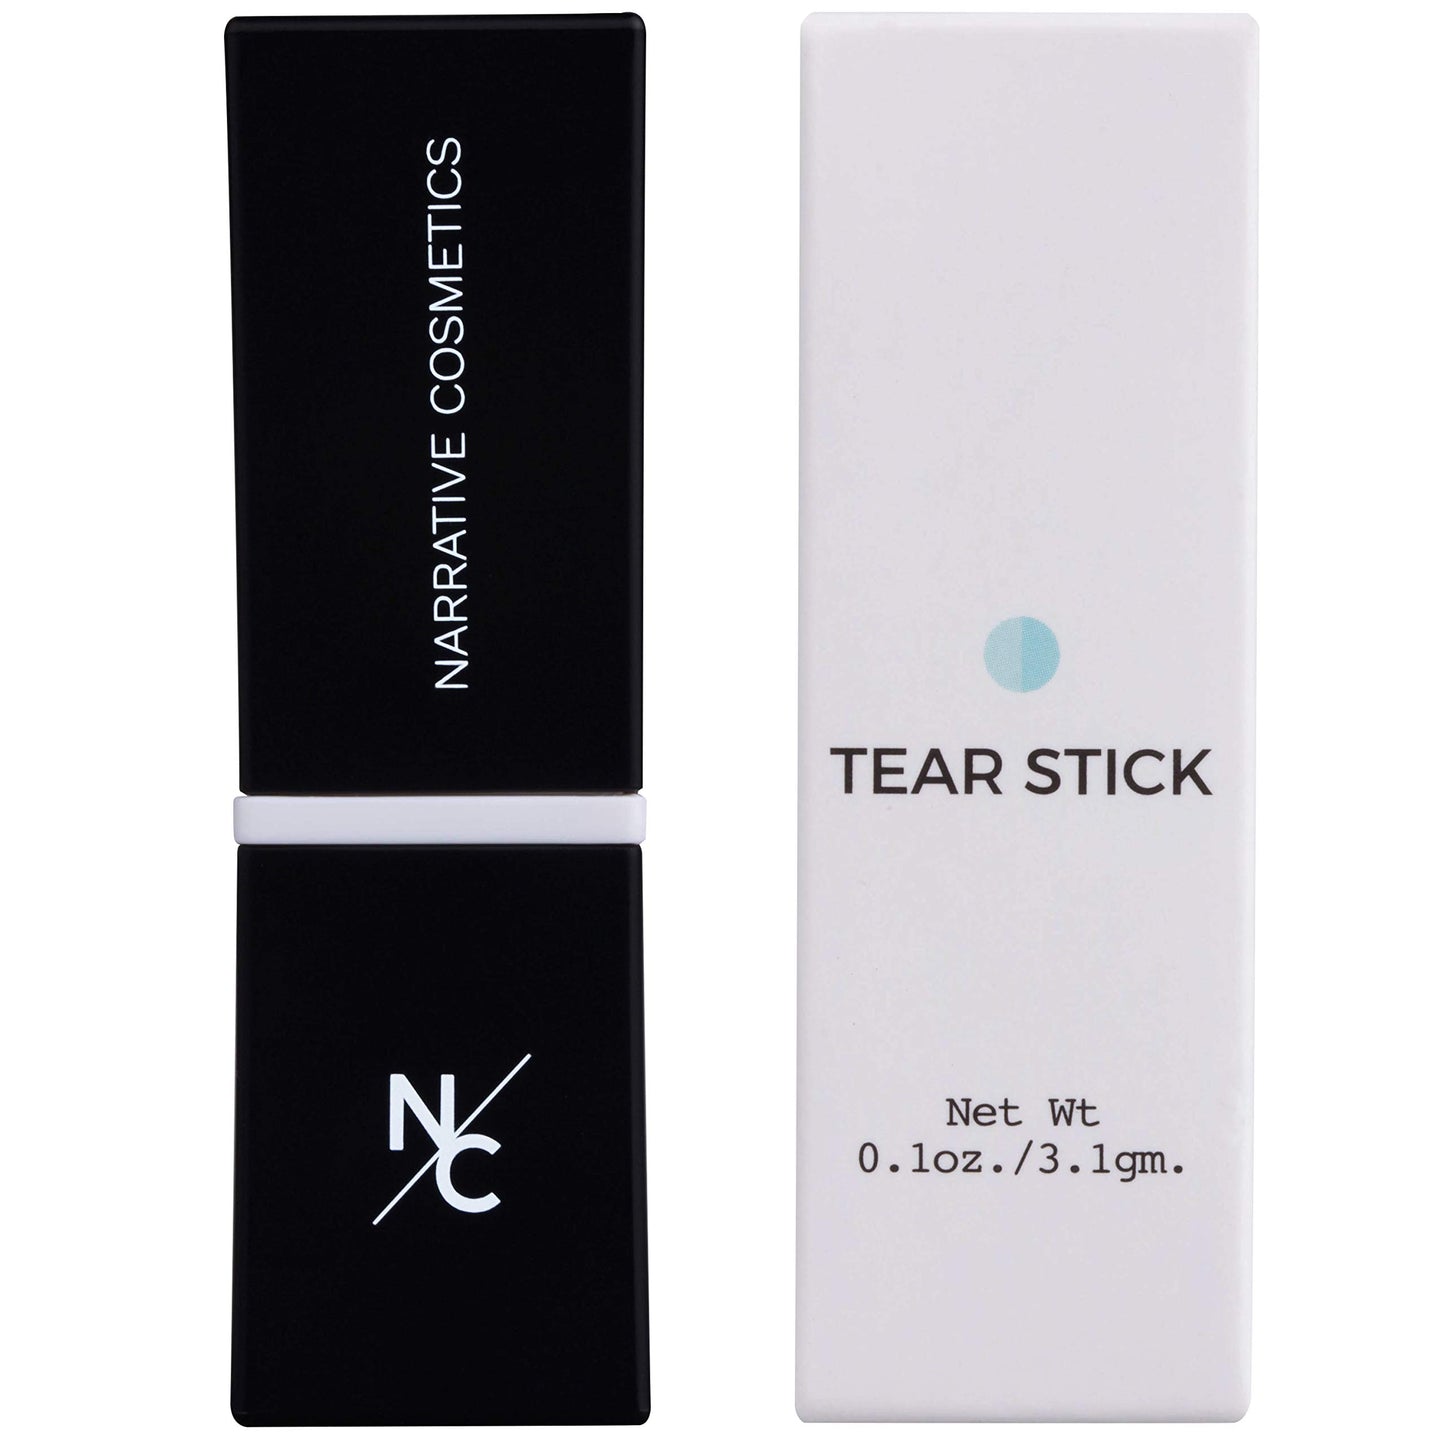 Narrative Cosmetics Tear Stick, Menthol-Infused Wax for Natural Tears on Cue, Professional SFX Makeup for Film, Theatre, TV, Acting